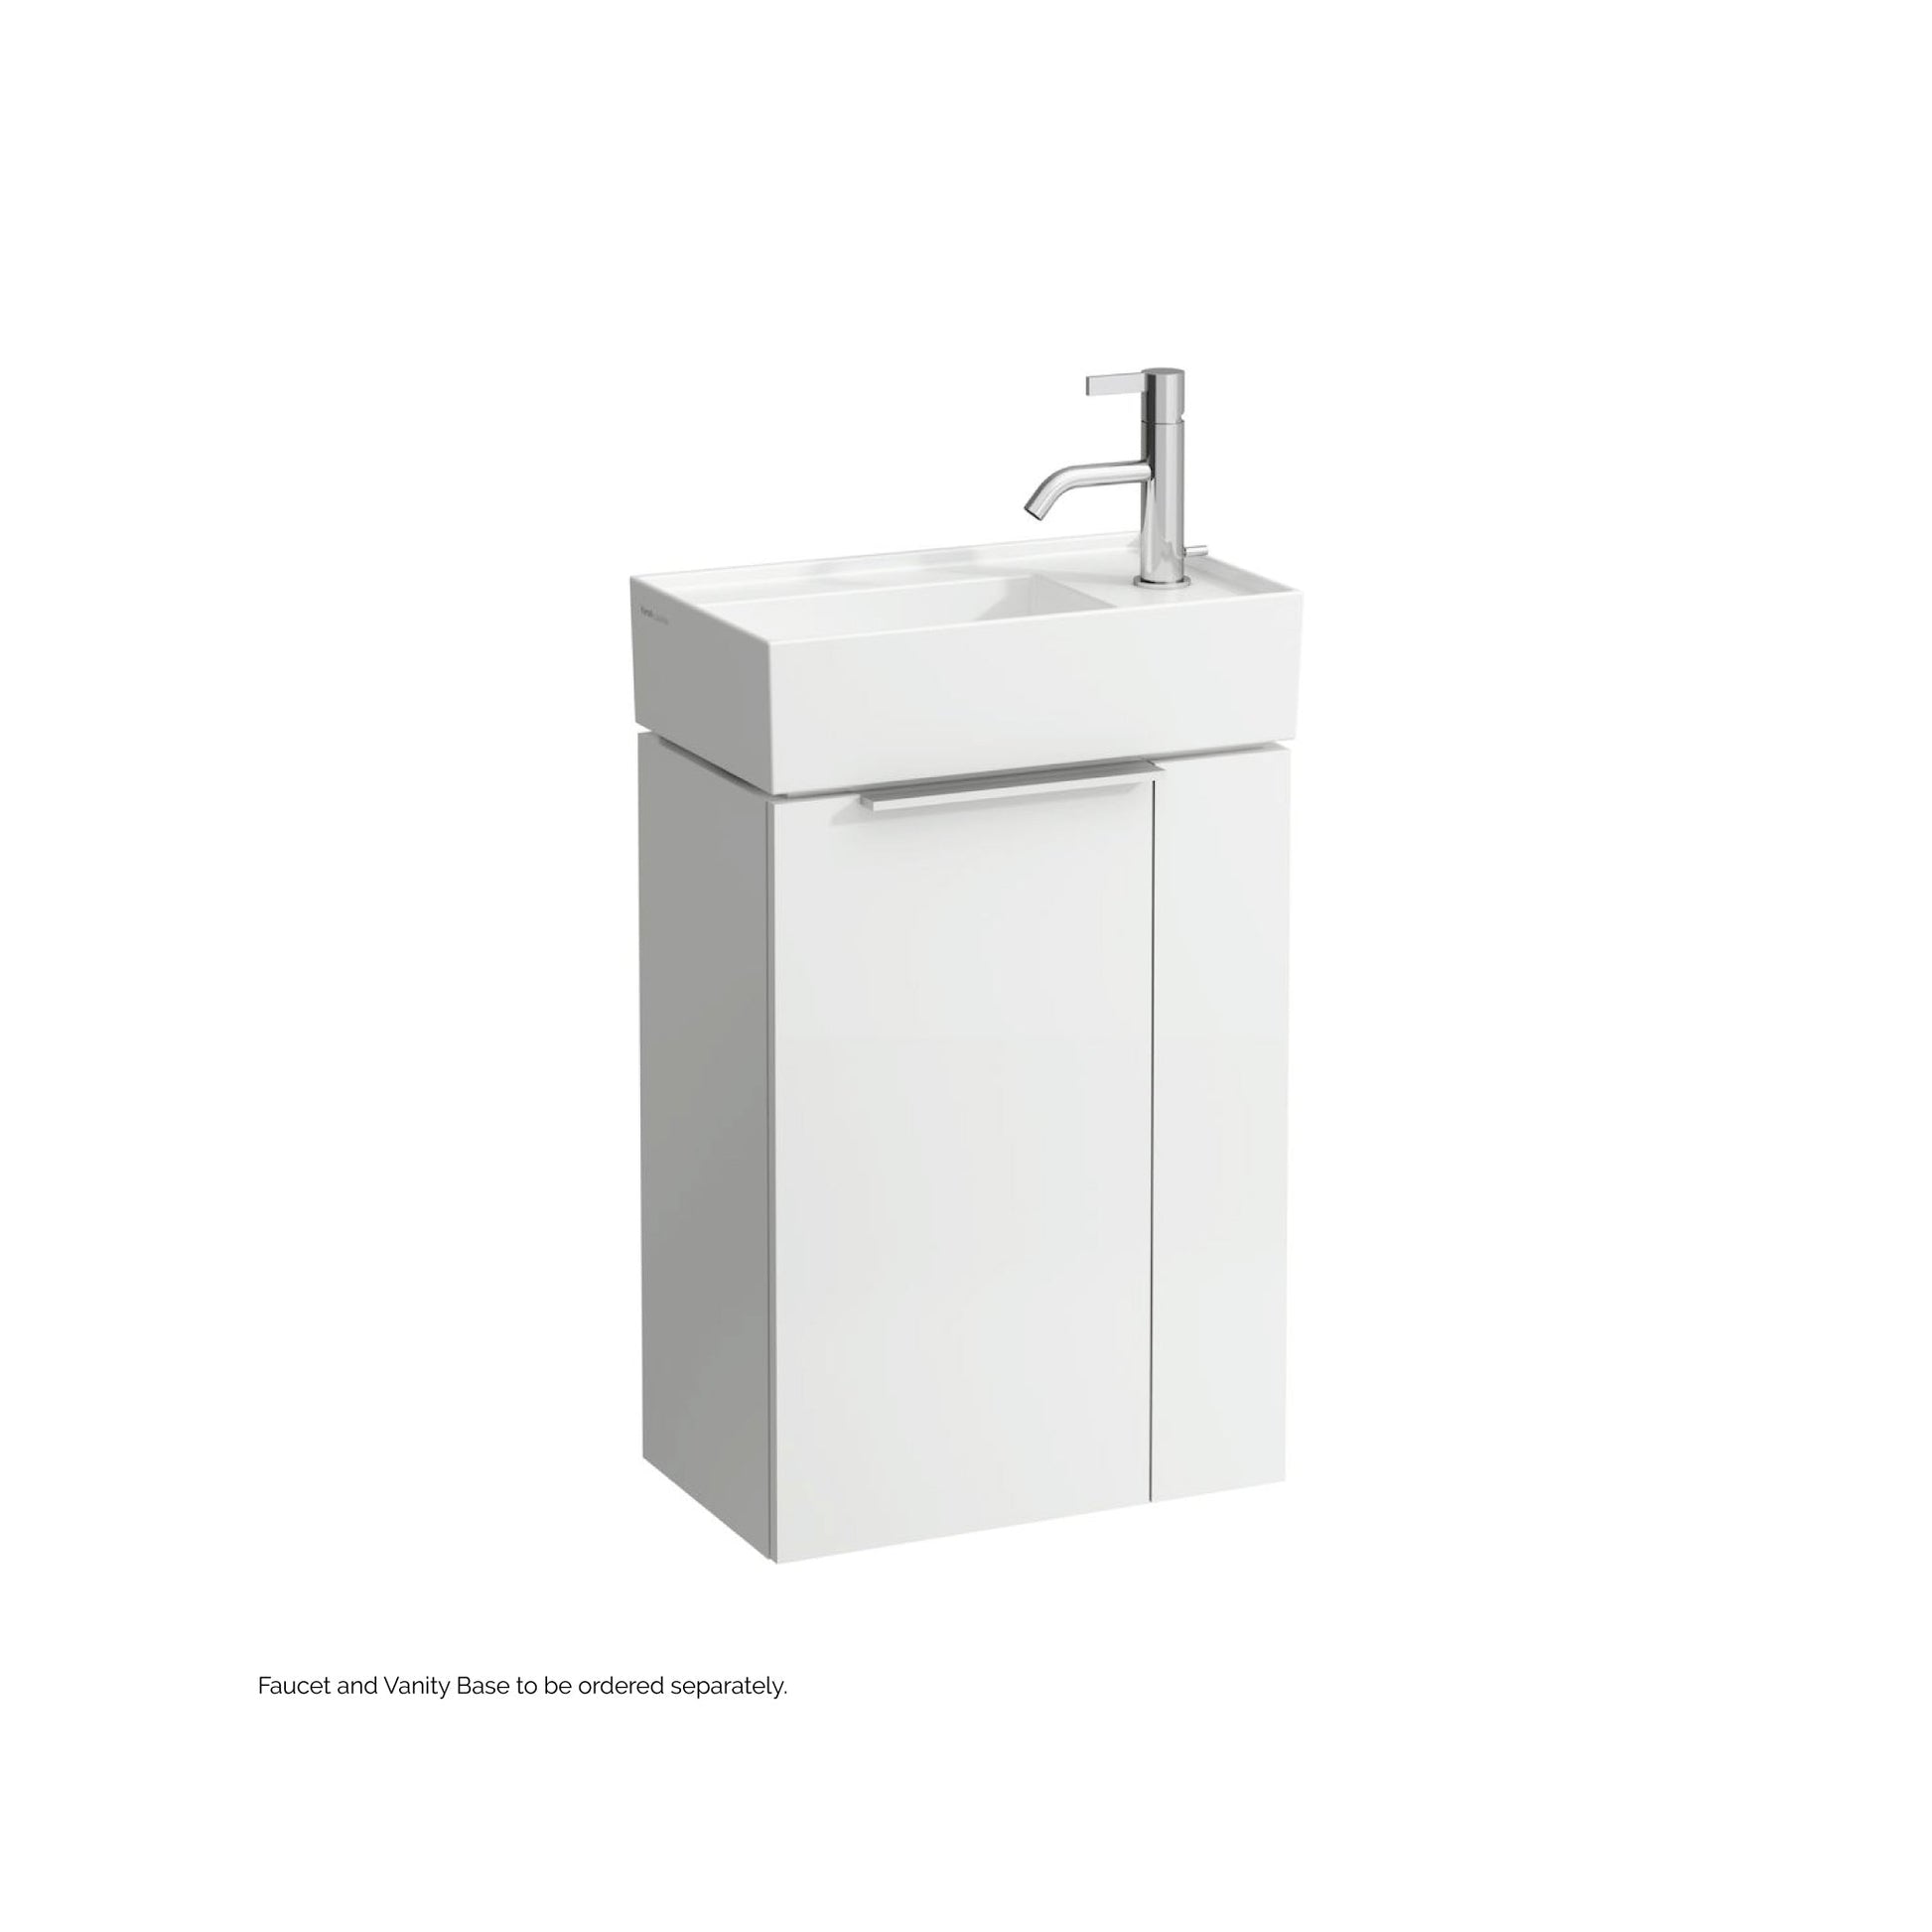 Laufen Kartell 18" x 11" White Wall-Mounted Tap Bank-Right Bathroom Sink With Faucet Hole